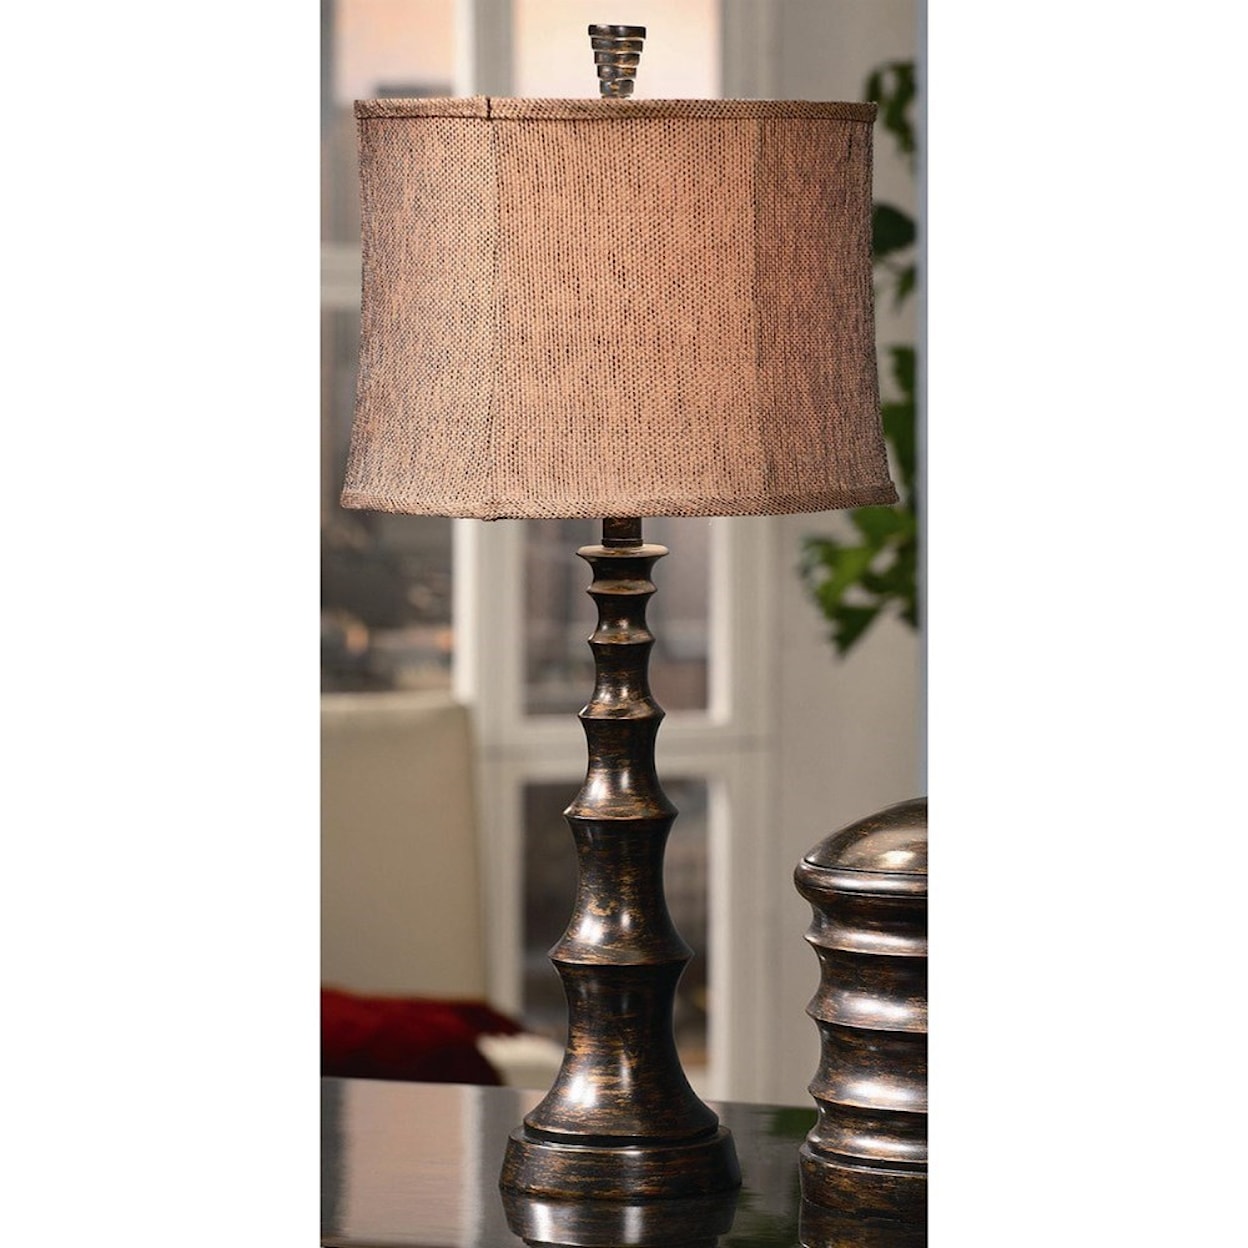 Crestview Collection Lighting Orlo Table Lamp